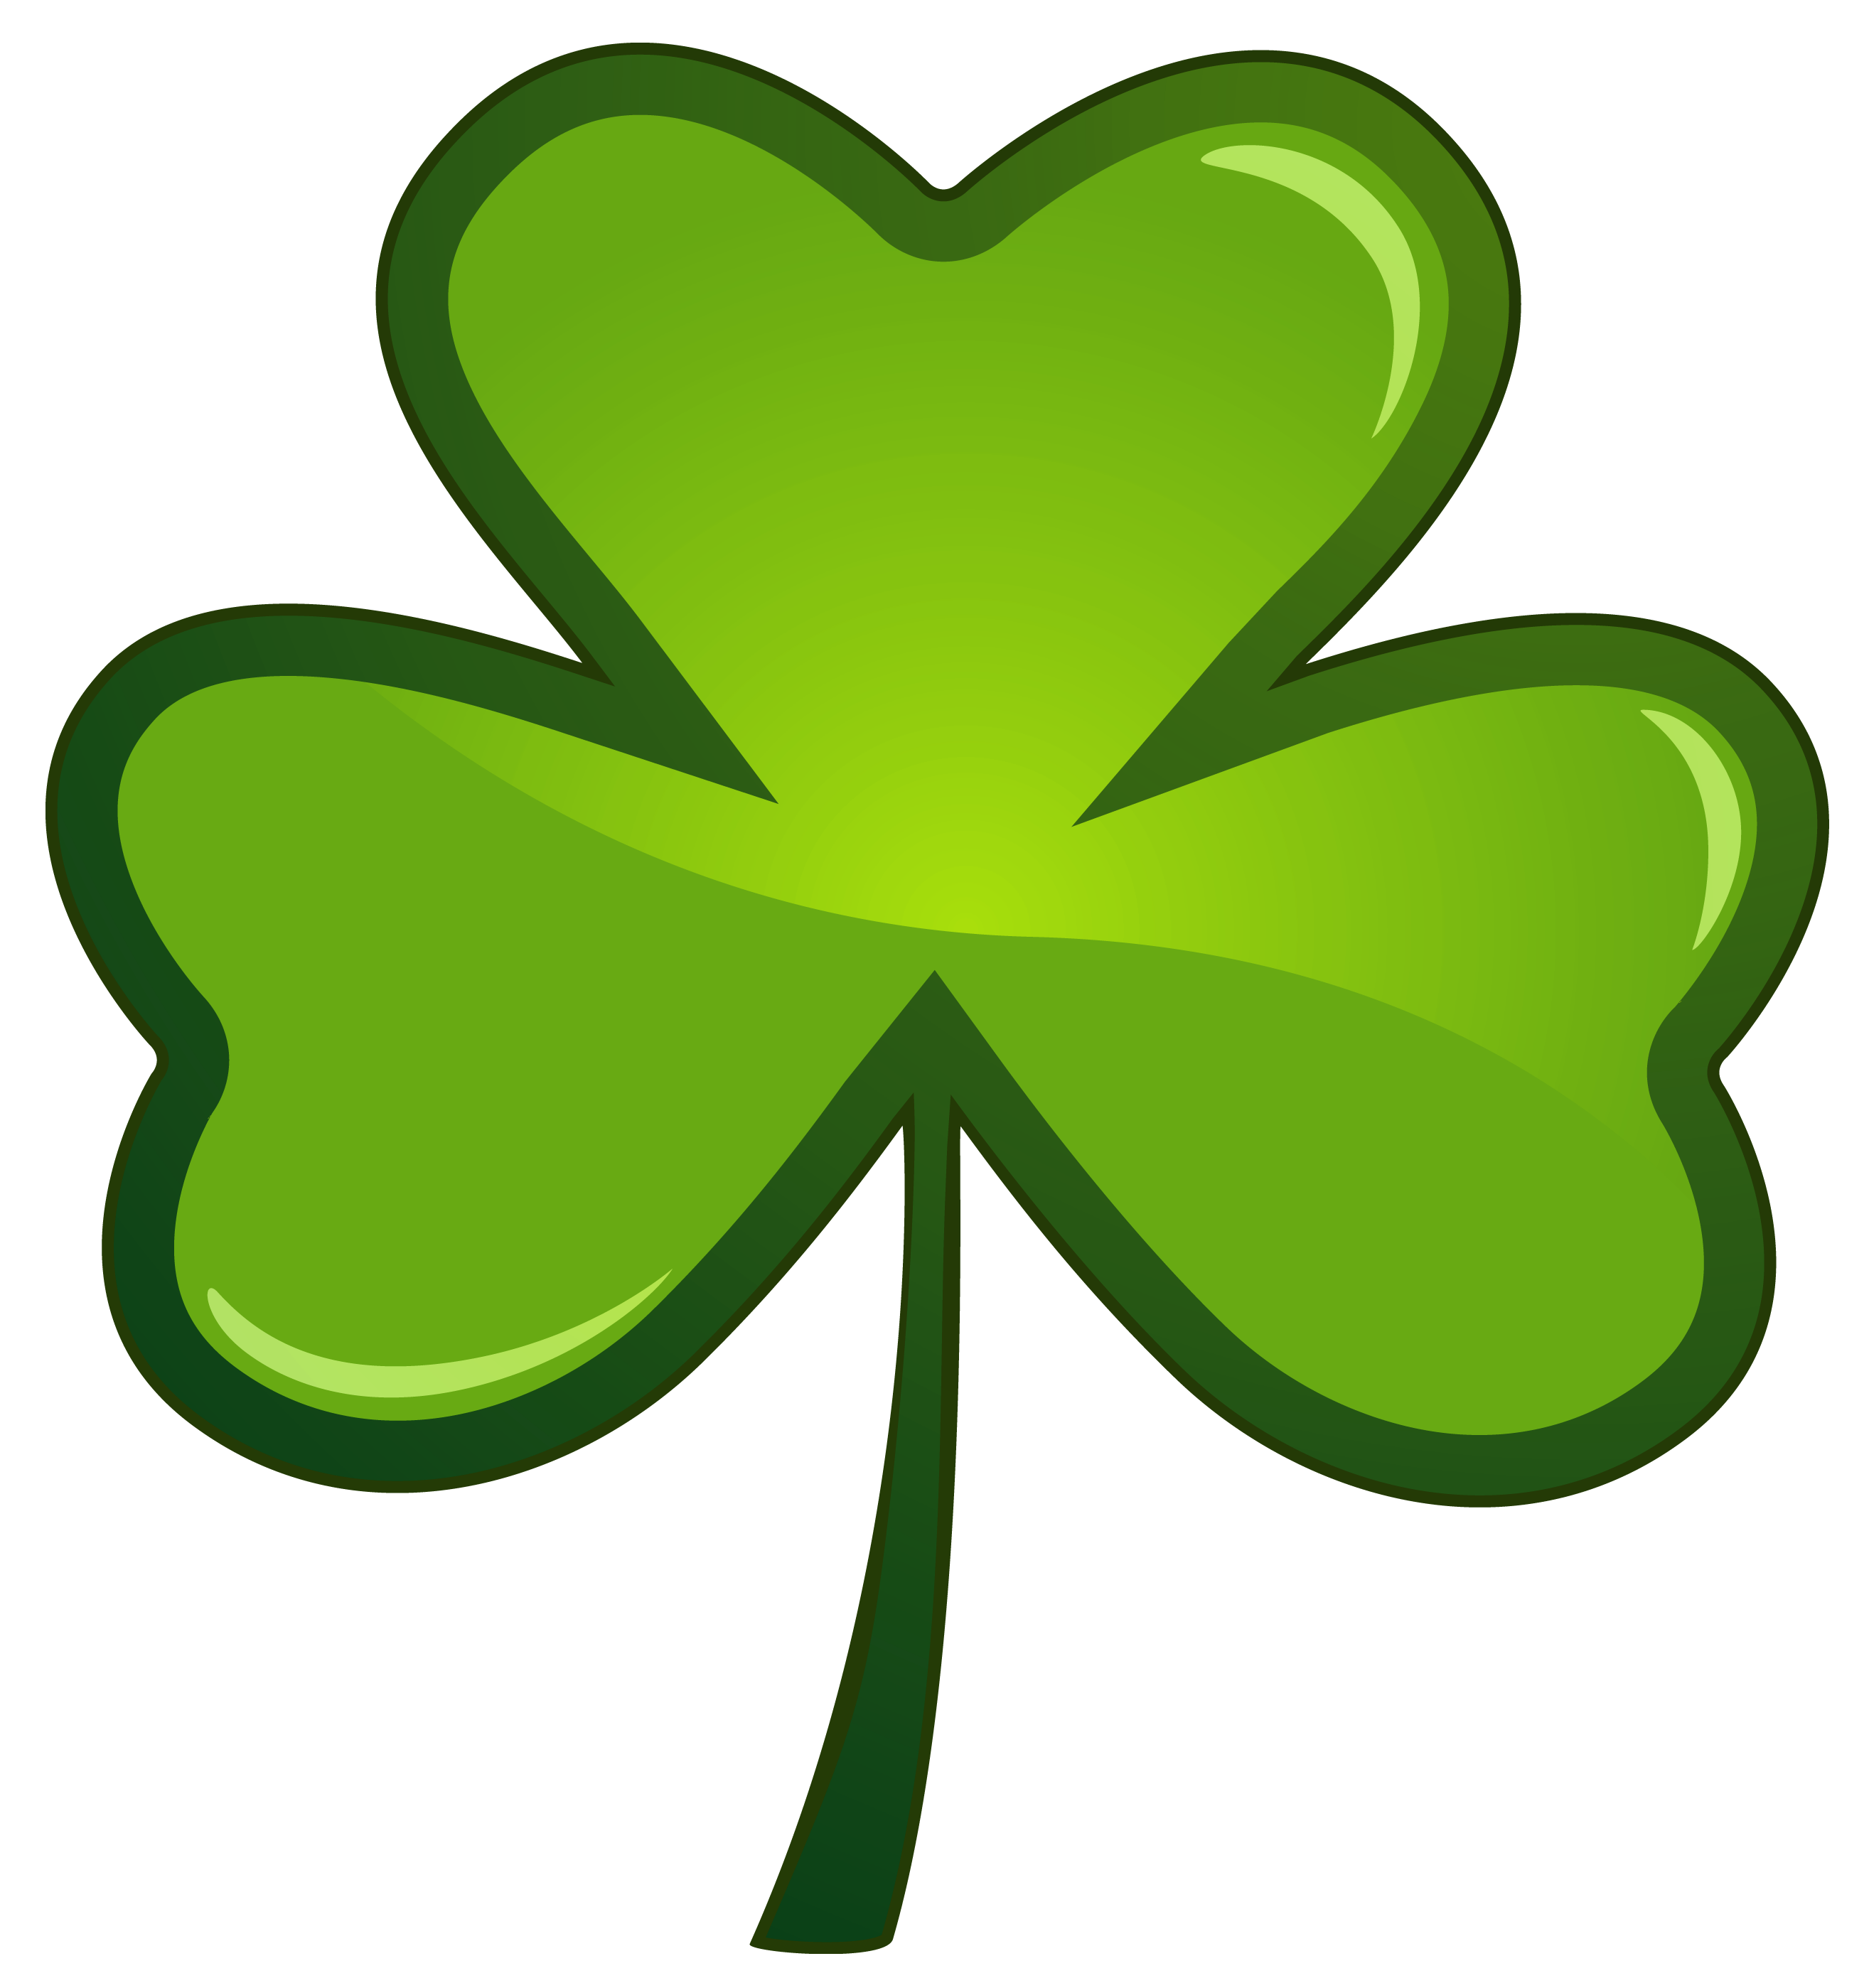 St Patricks Day Shamrock PNG Clipart Picture